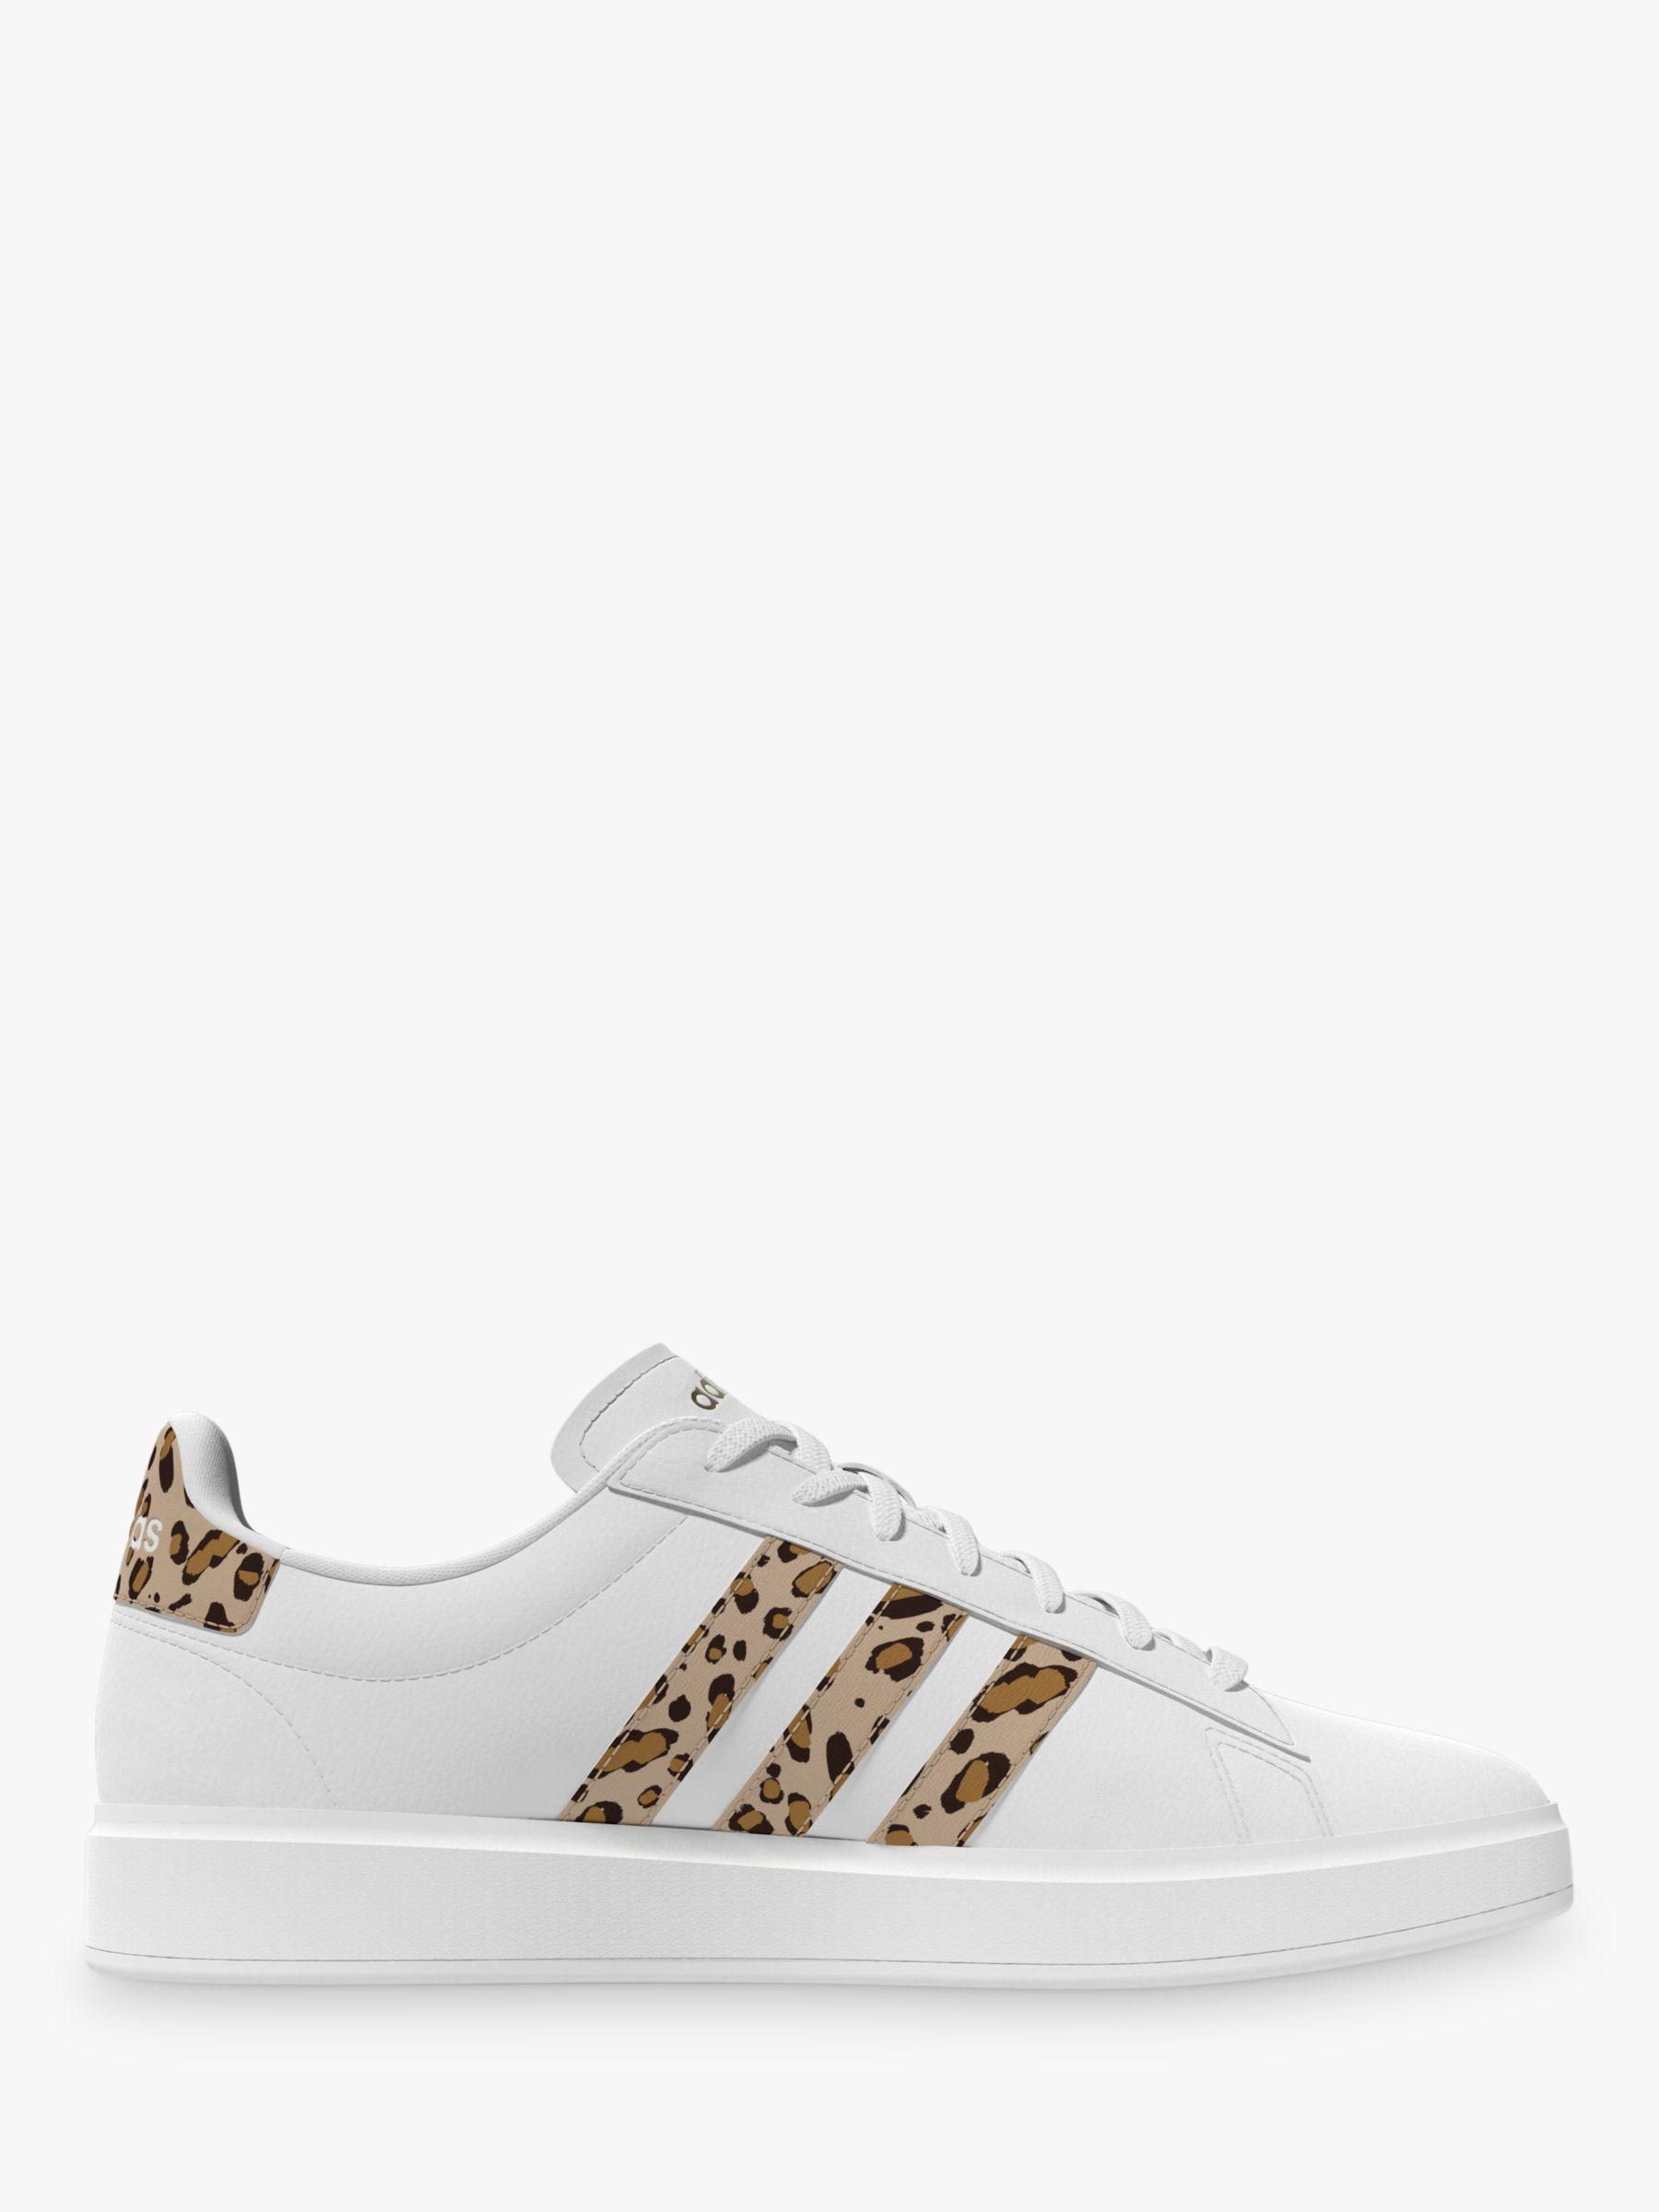 adidas Grand Court Leopard Lace Up Trainers in White | Lyst UK